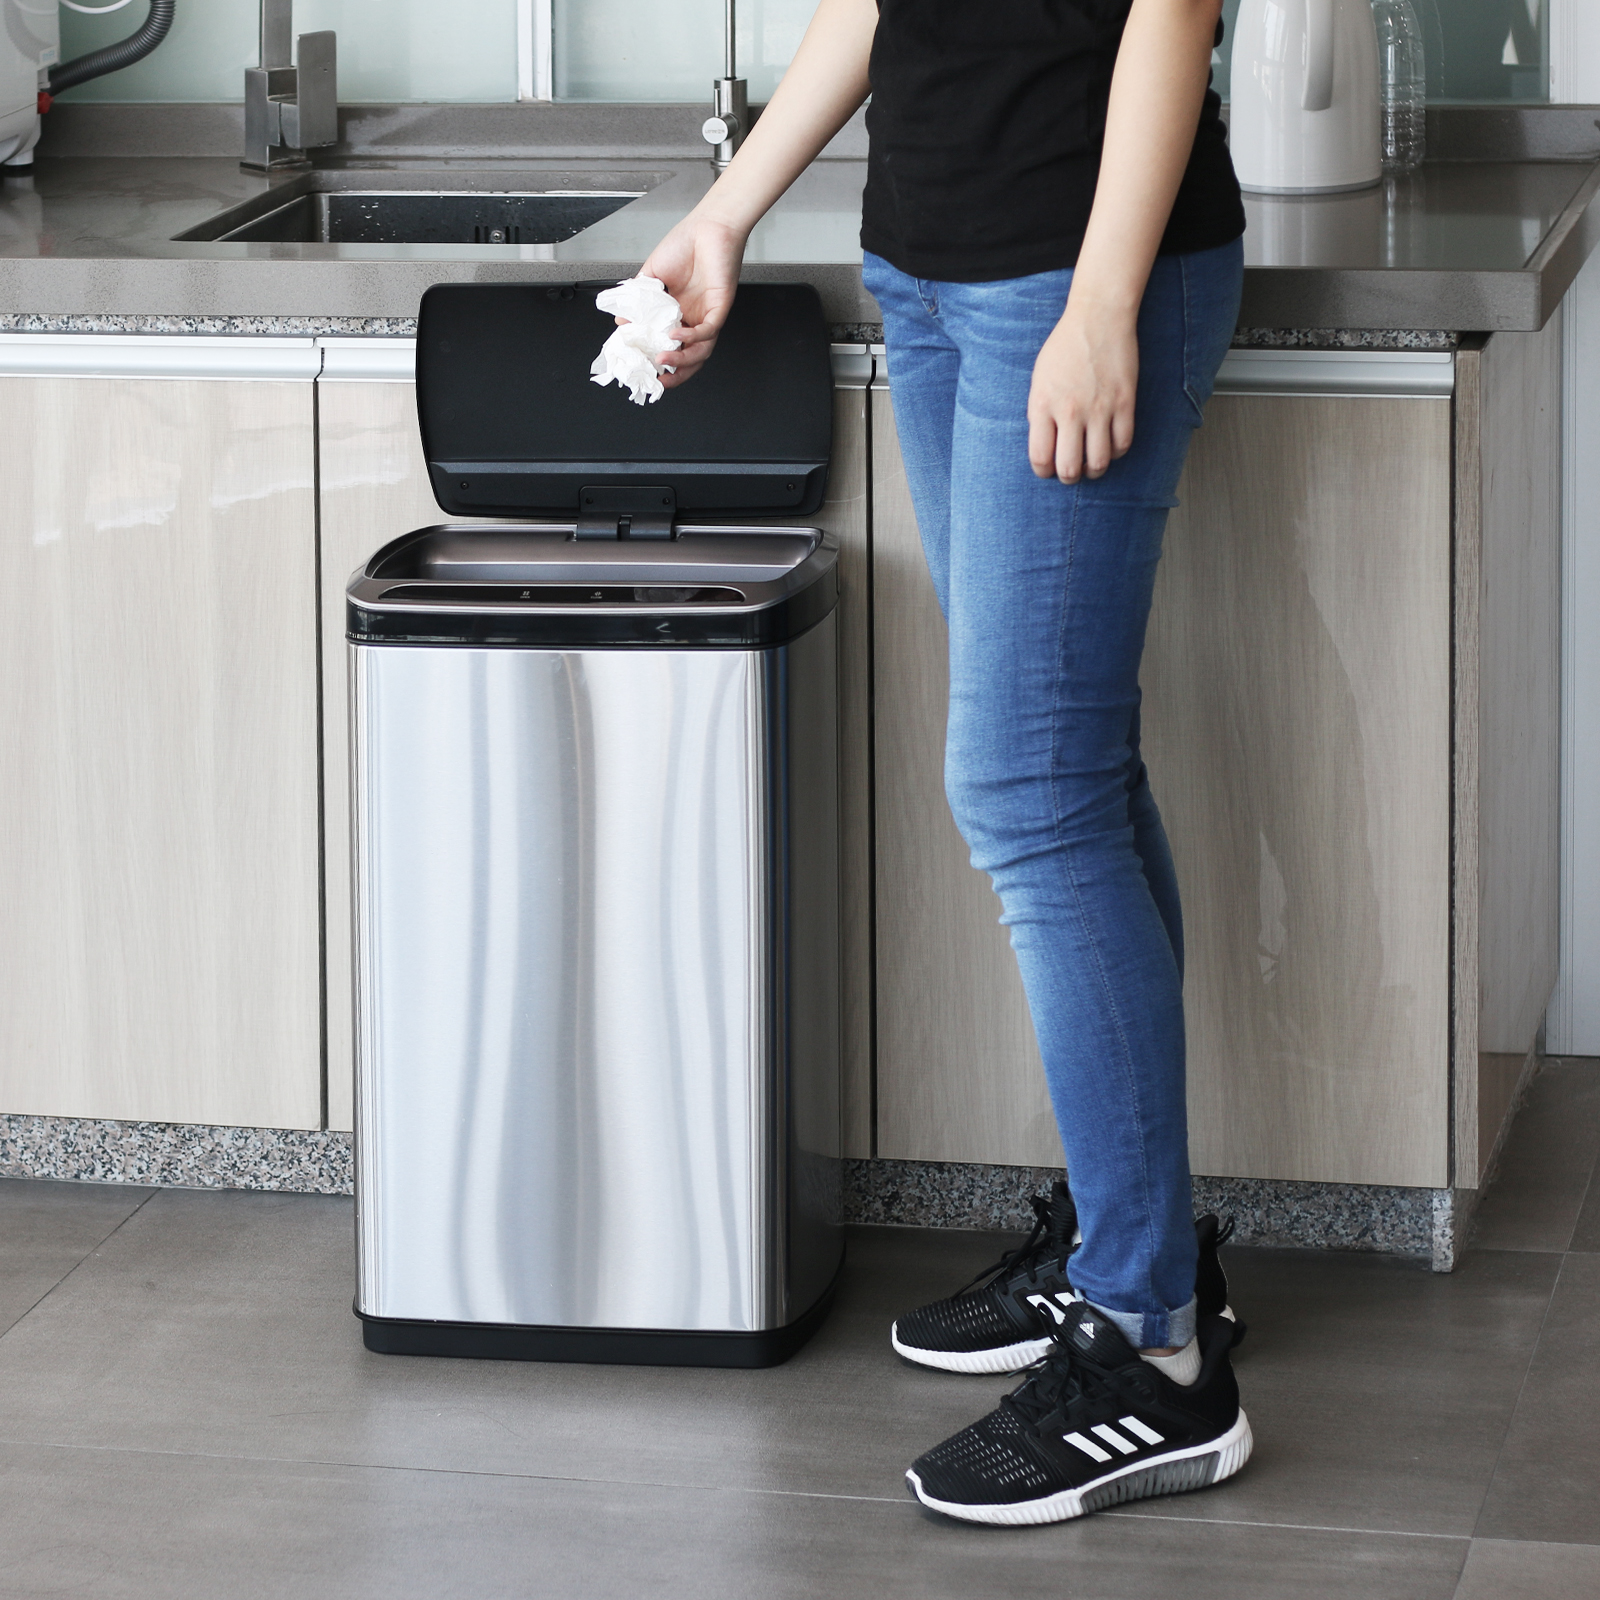 50L smart trash bin 13 gallons trash can sensor stainless steel trash can automatic household